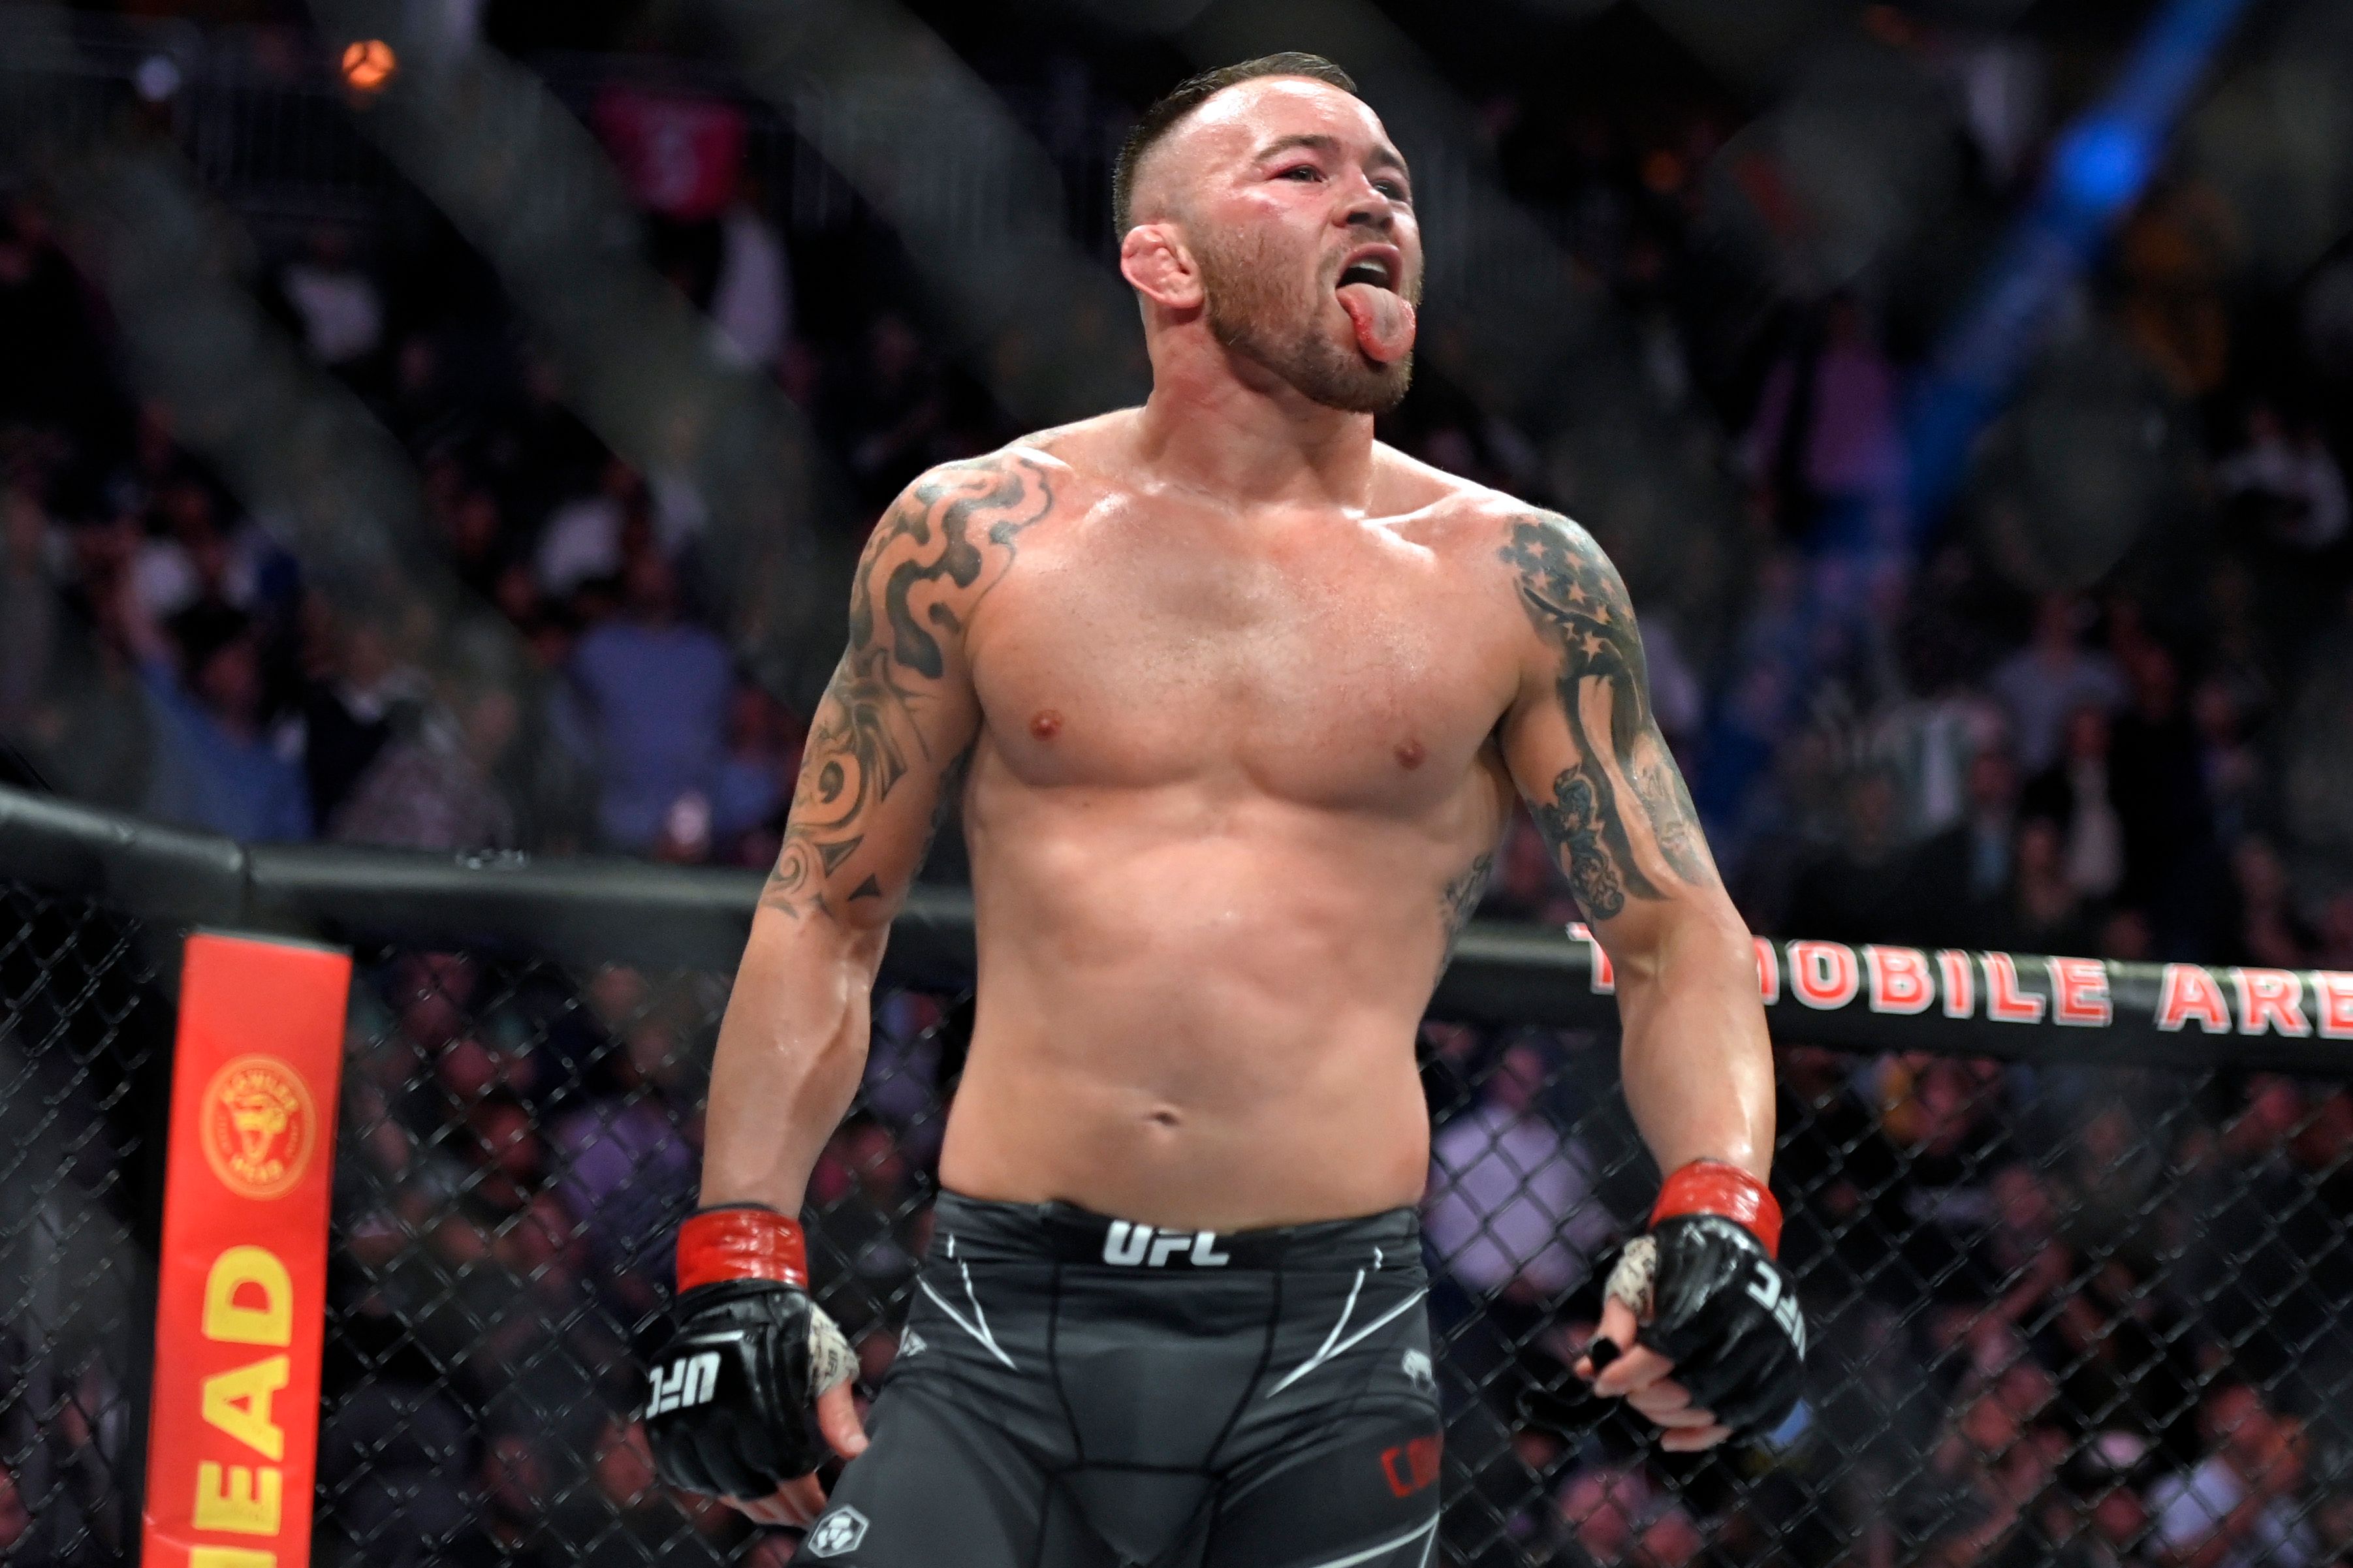 Colby Covington in the UFC octagon